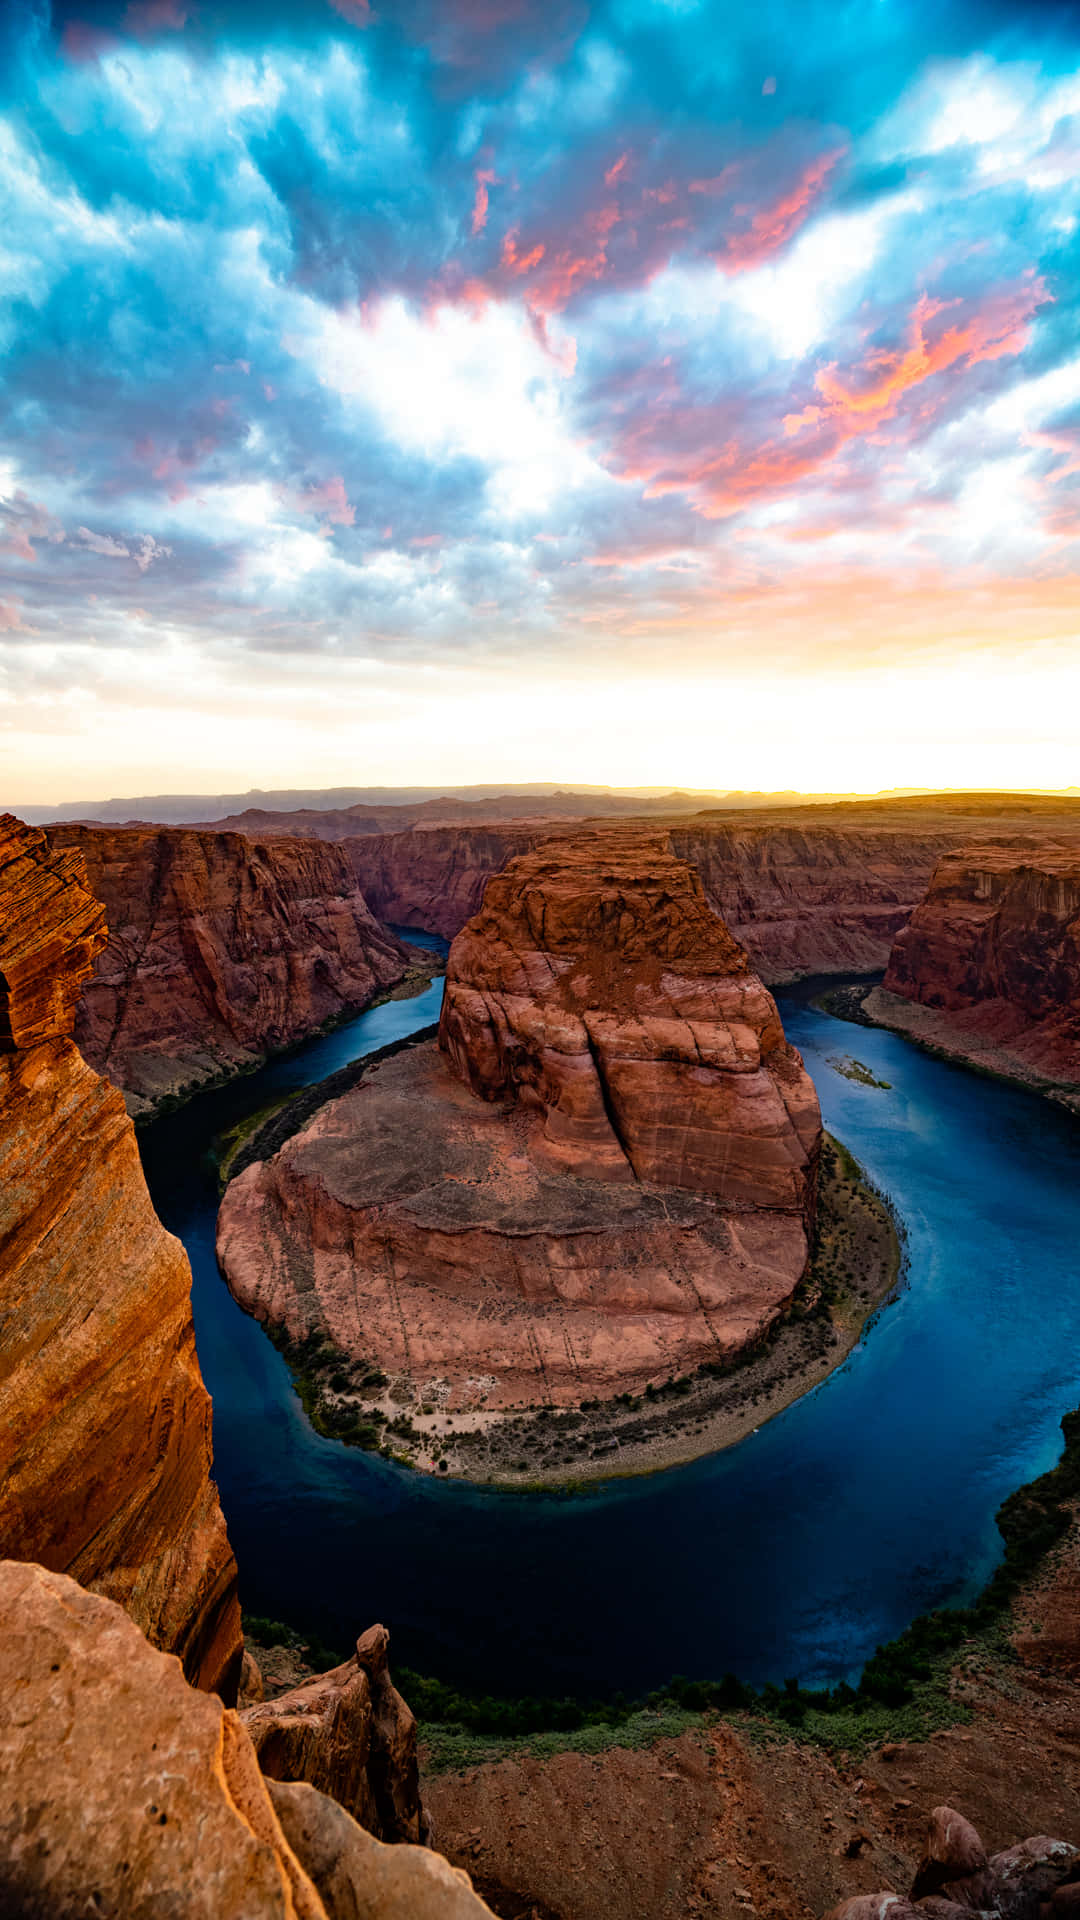 A Sunset Over The River In Horseshoe Canyon